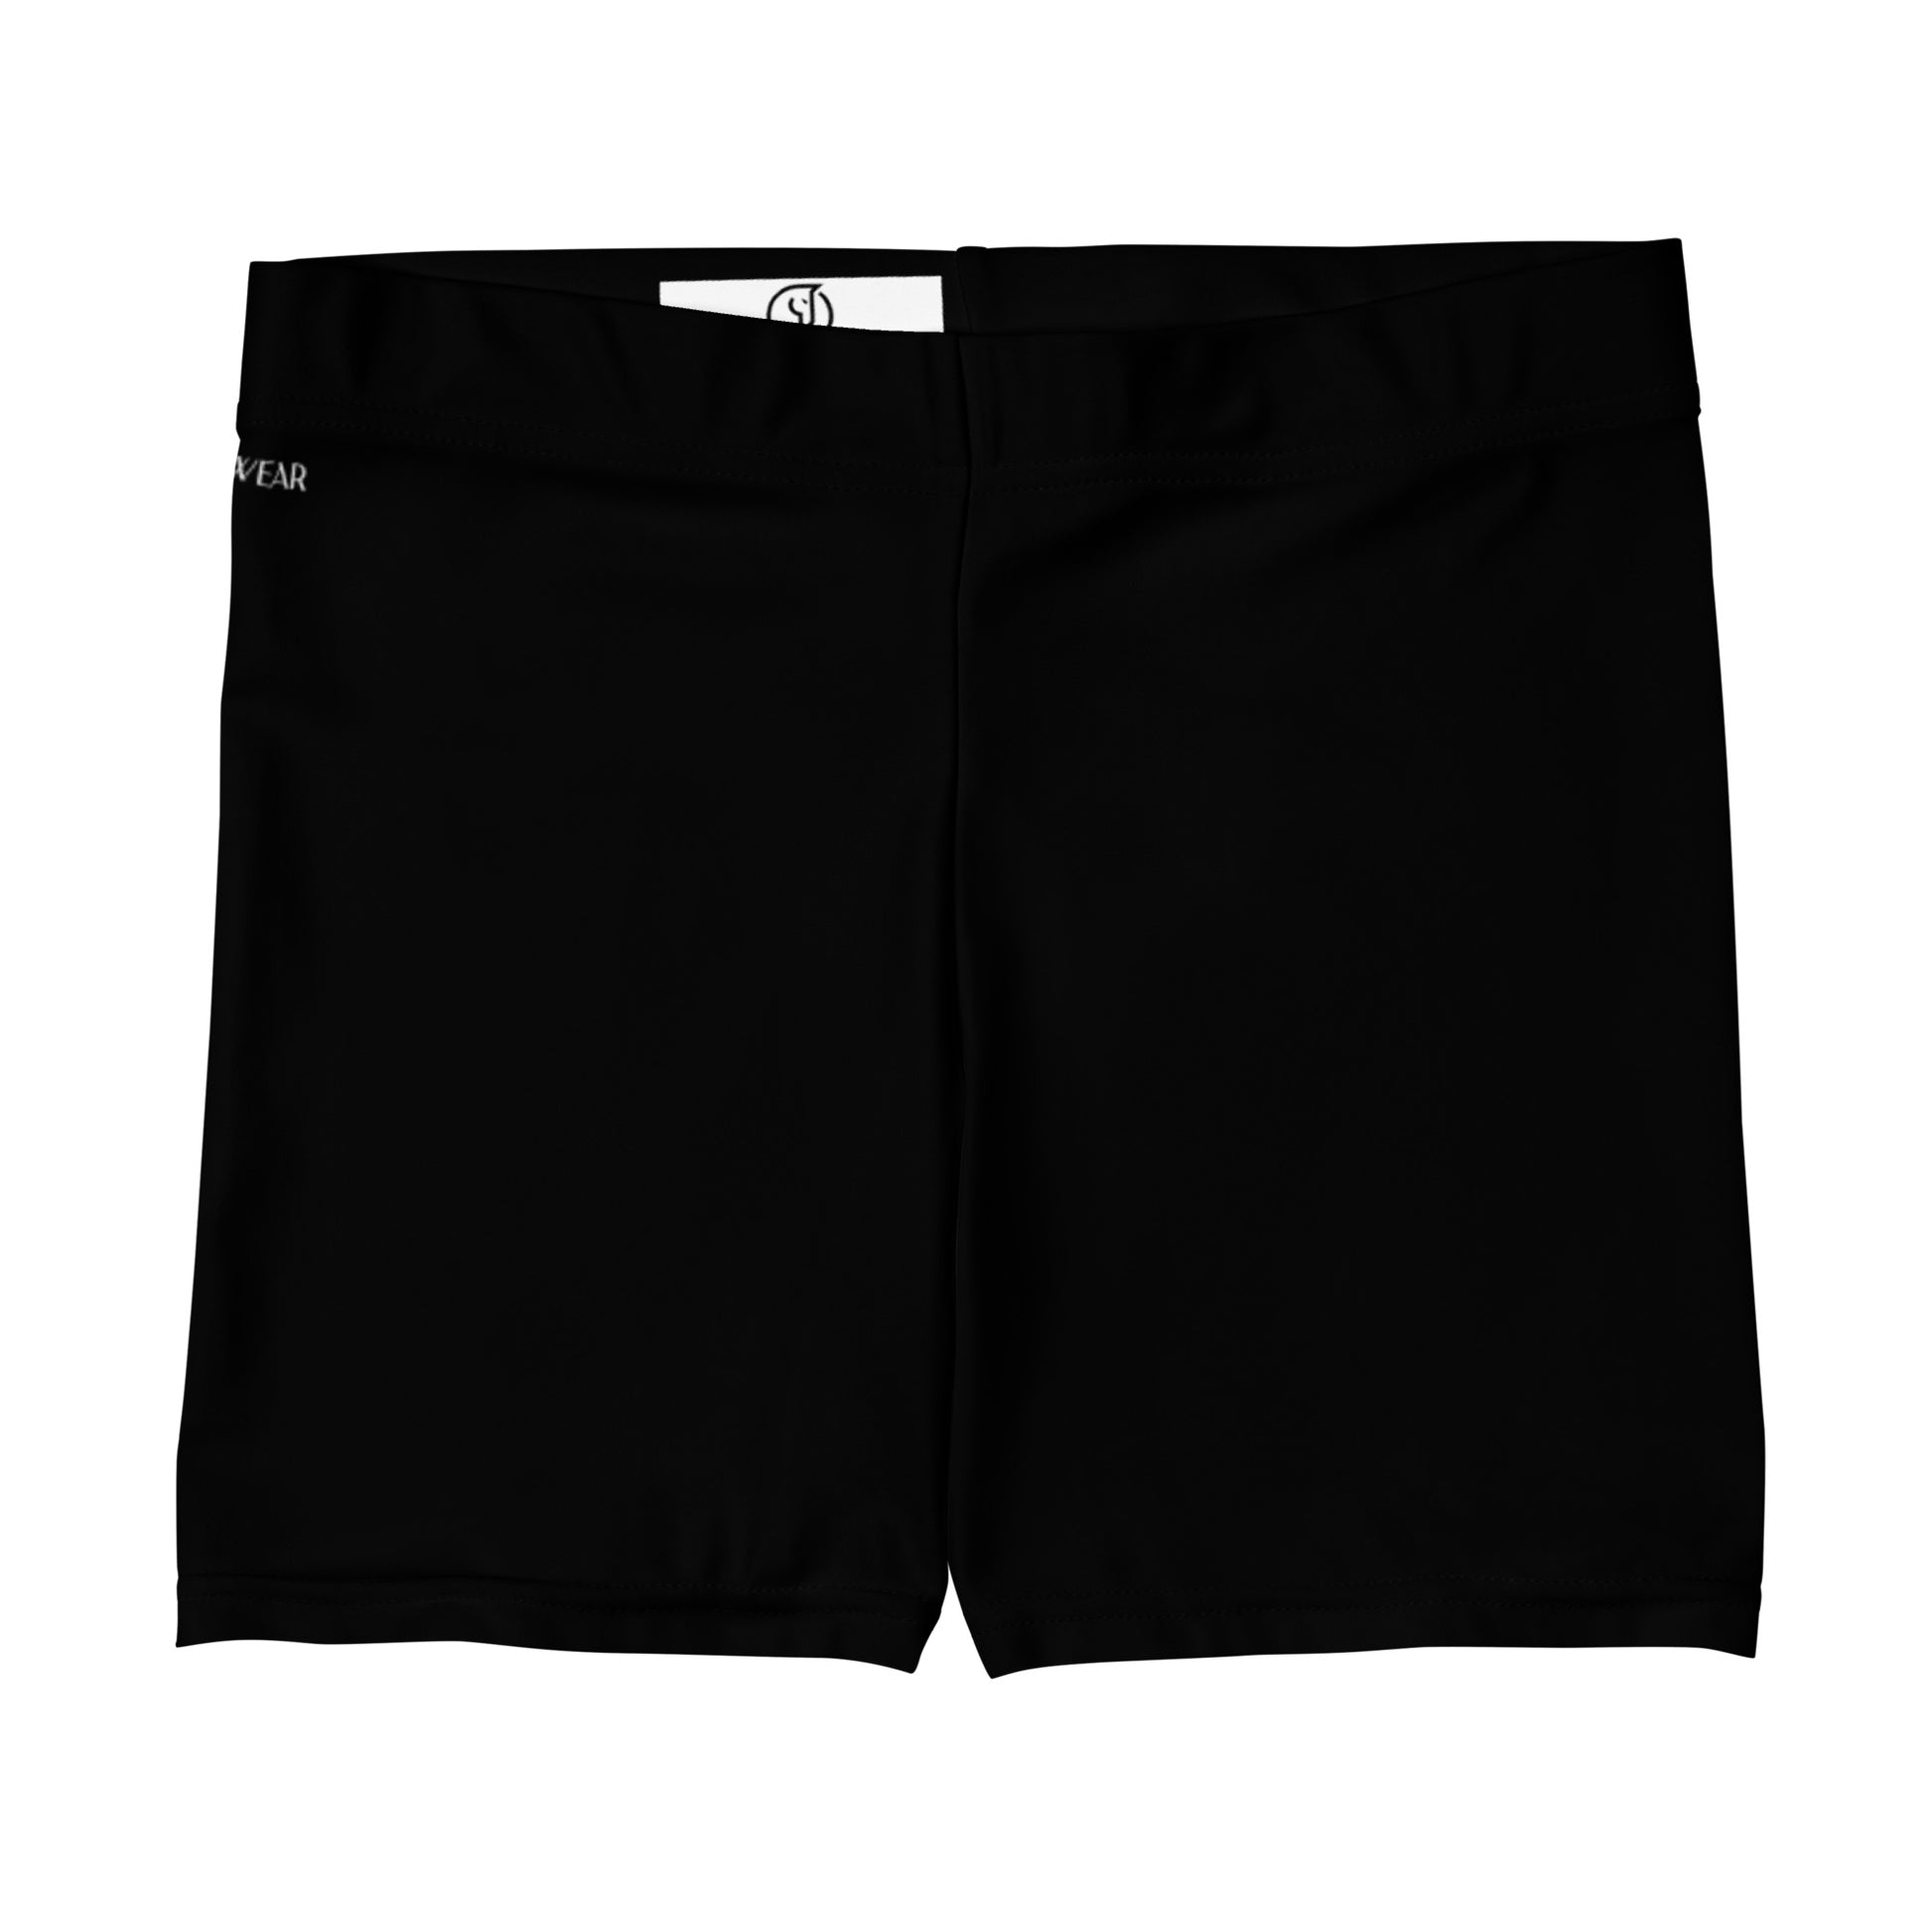 Humble Sportswear women's black Color Match activewear stretchy bike shorts for activewear, casual wear